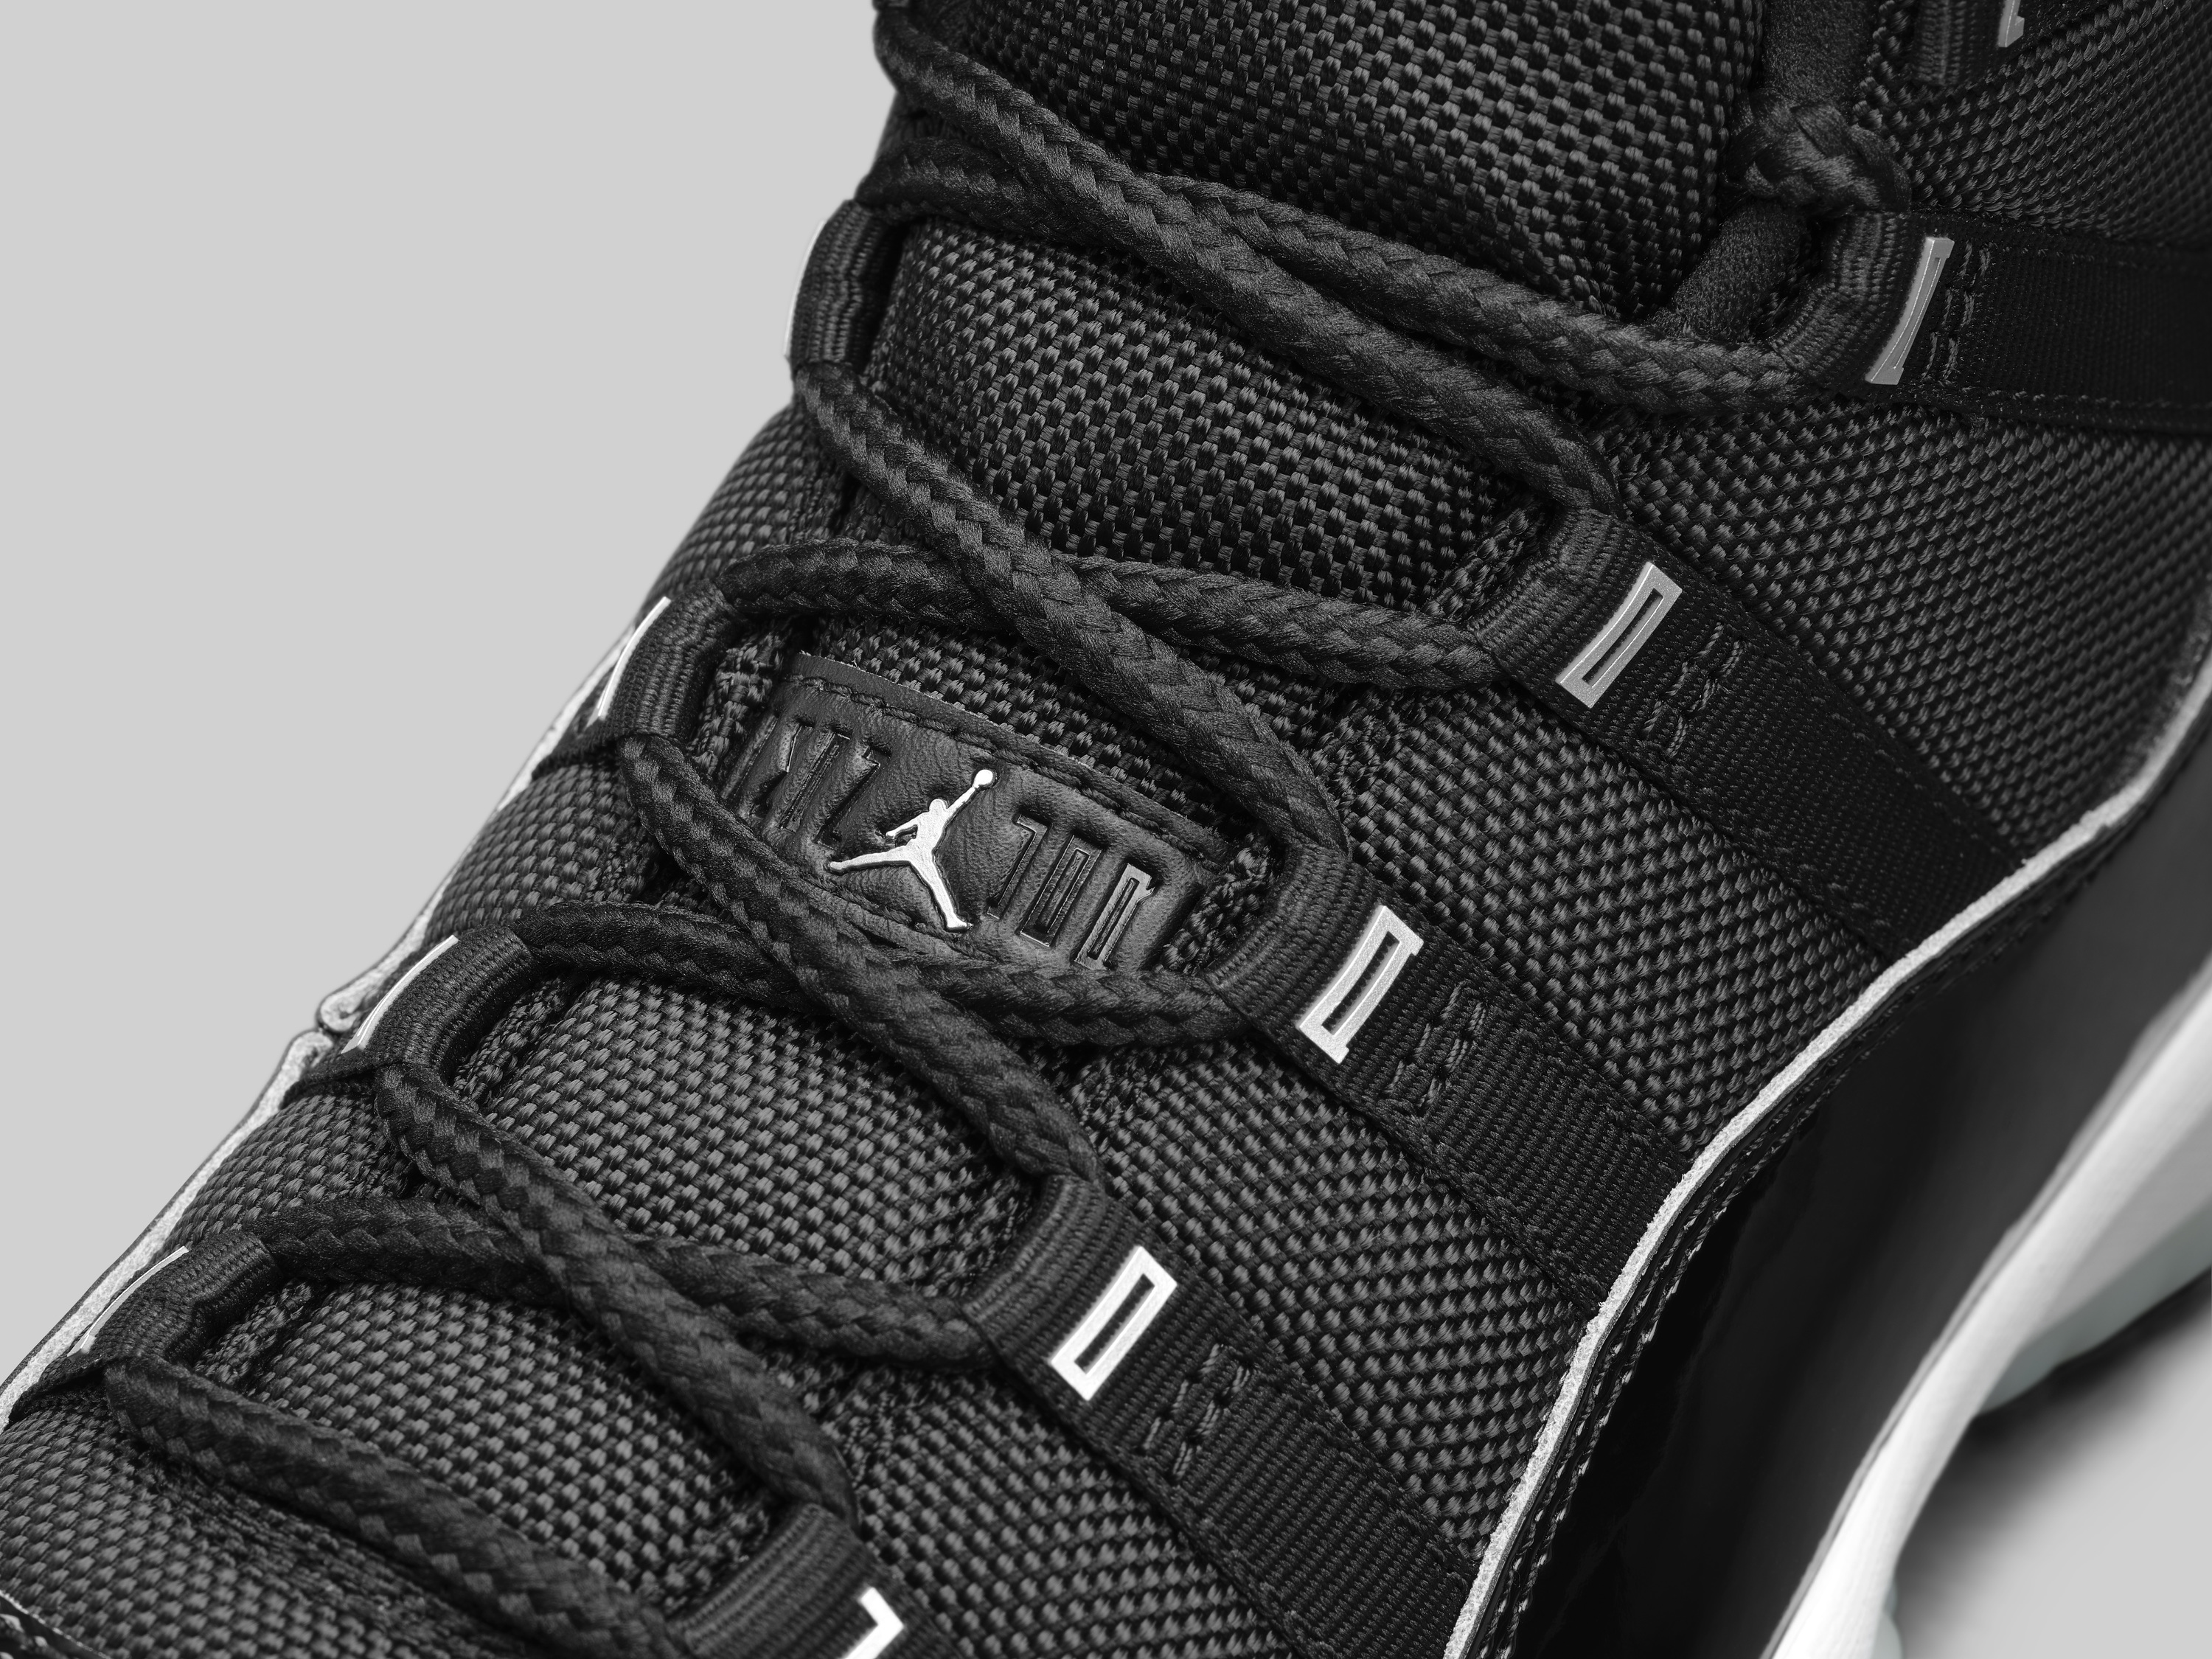 SNKRS Strikes Again, Sneaker Enthusiasts Vent About The Air Jordan 11